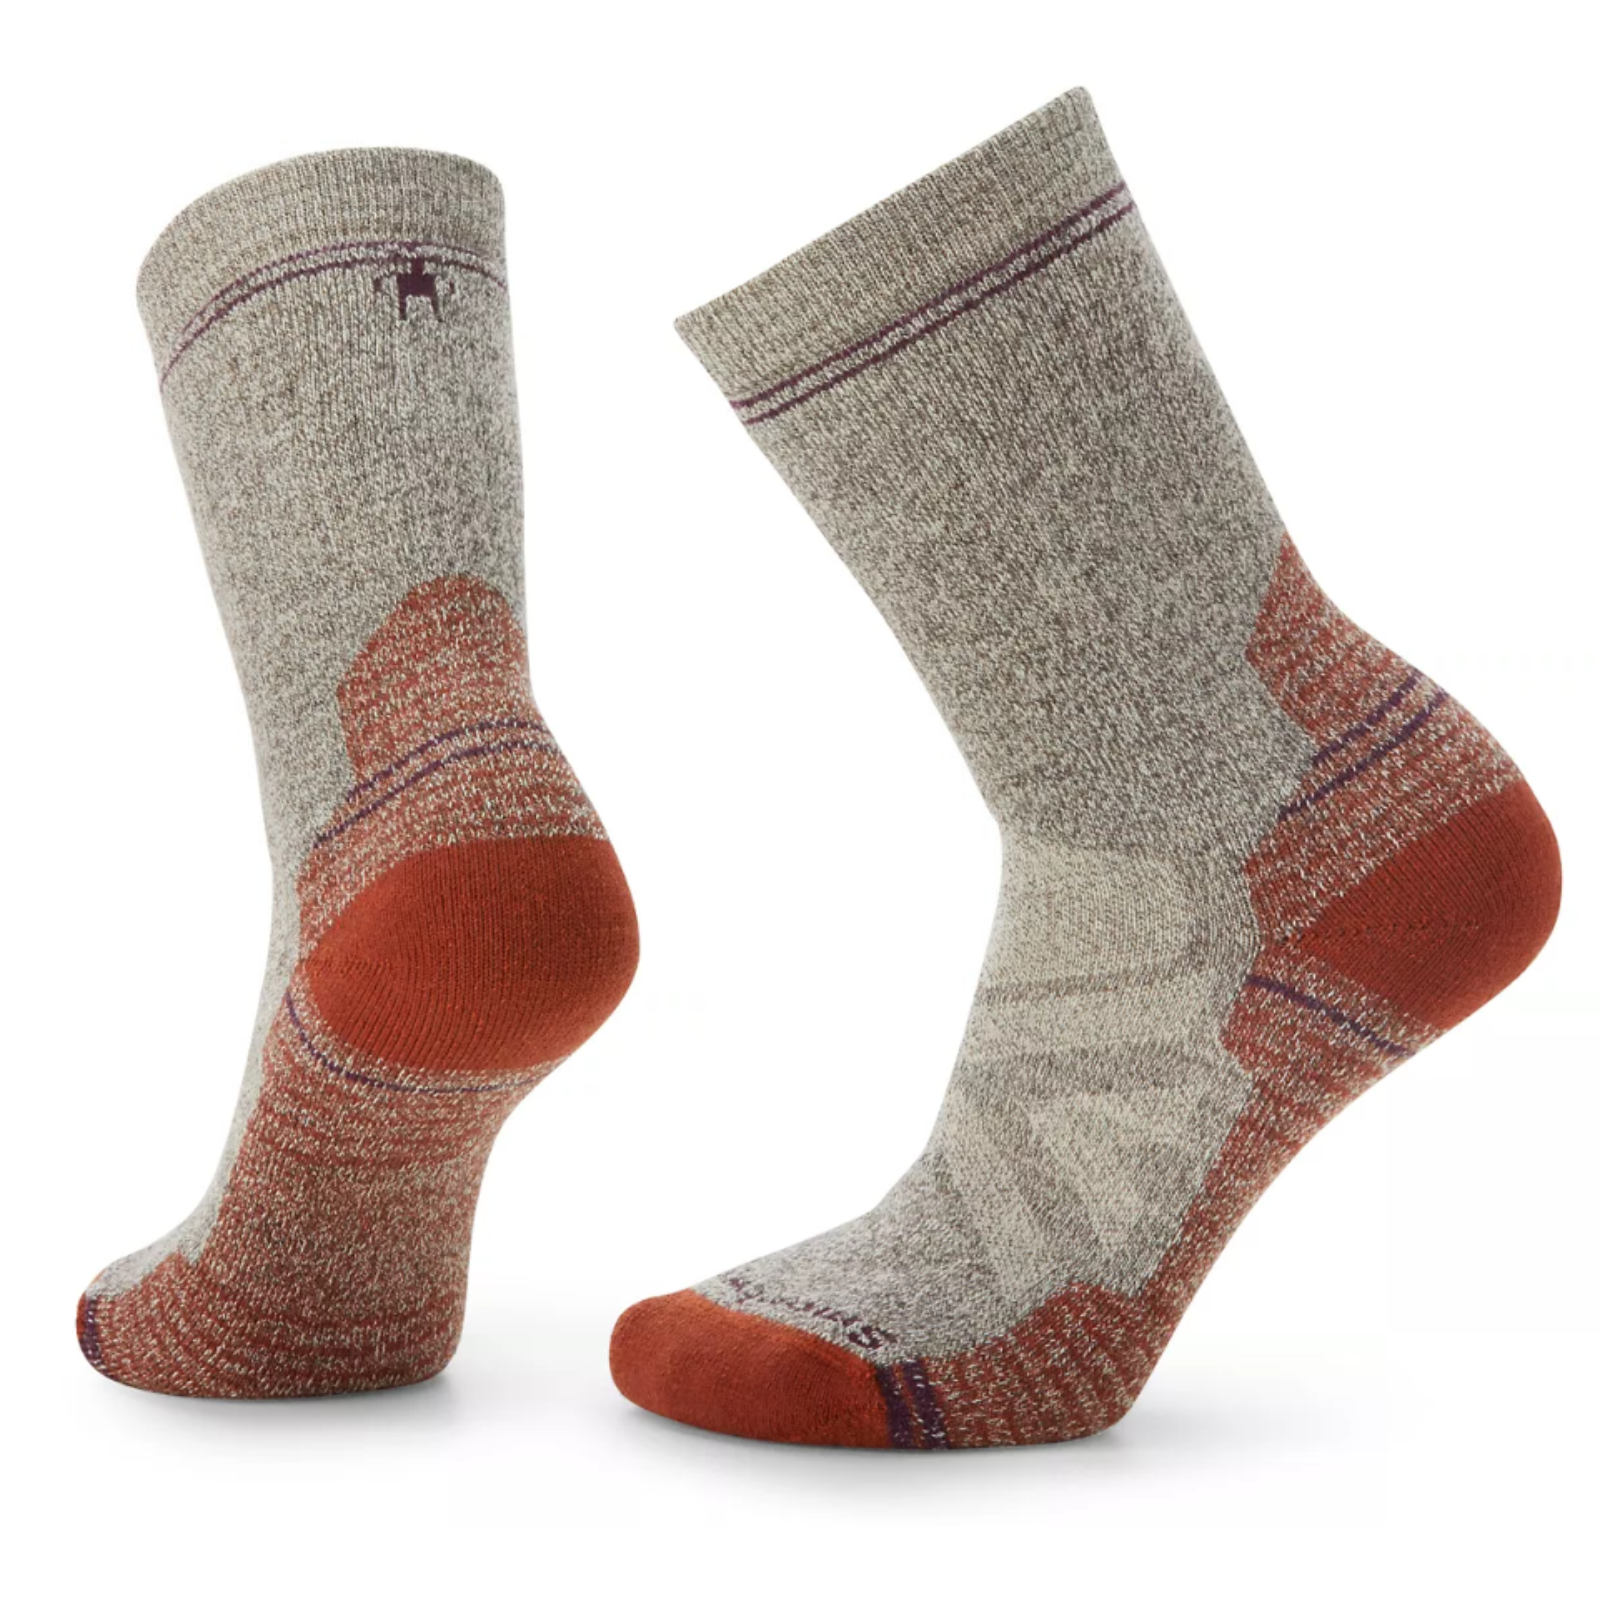 Smartwool Hike Full Cushion Crew women's sock in natural color. Sock shown on display feet. 